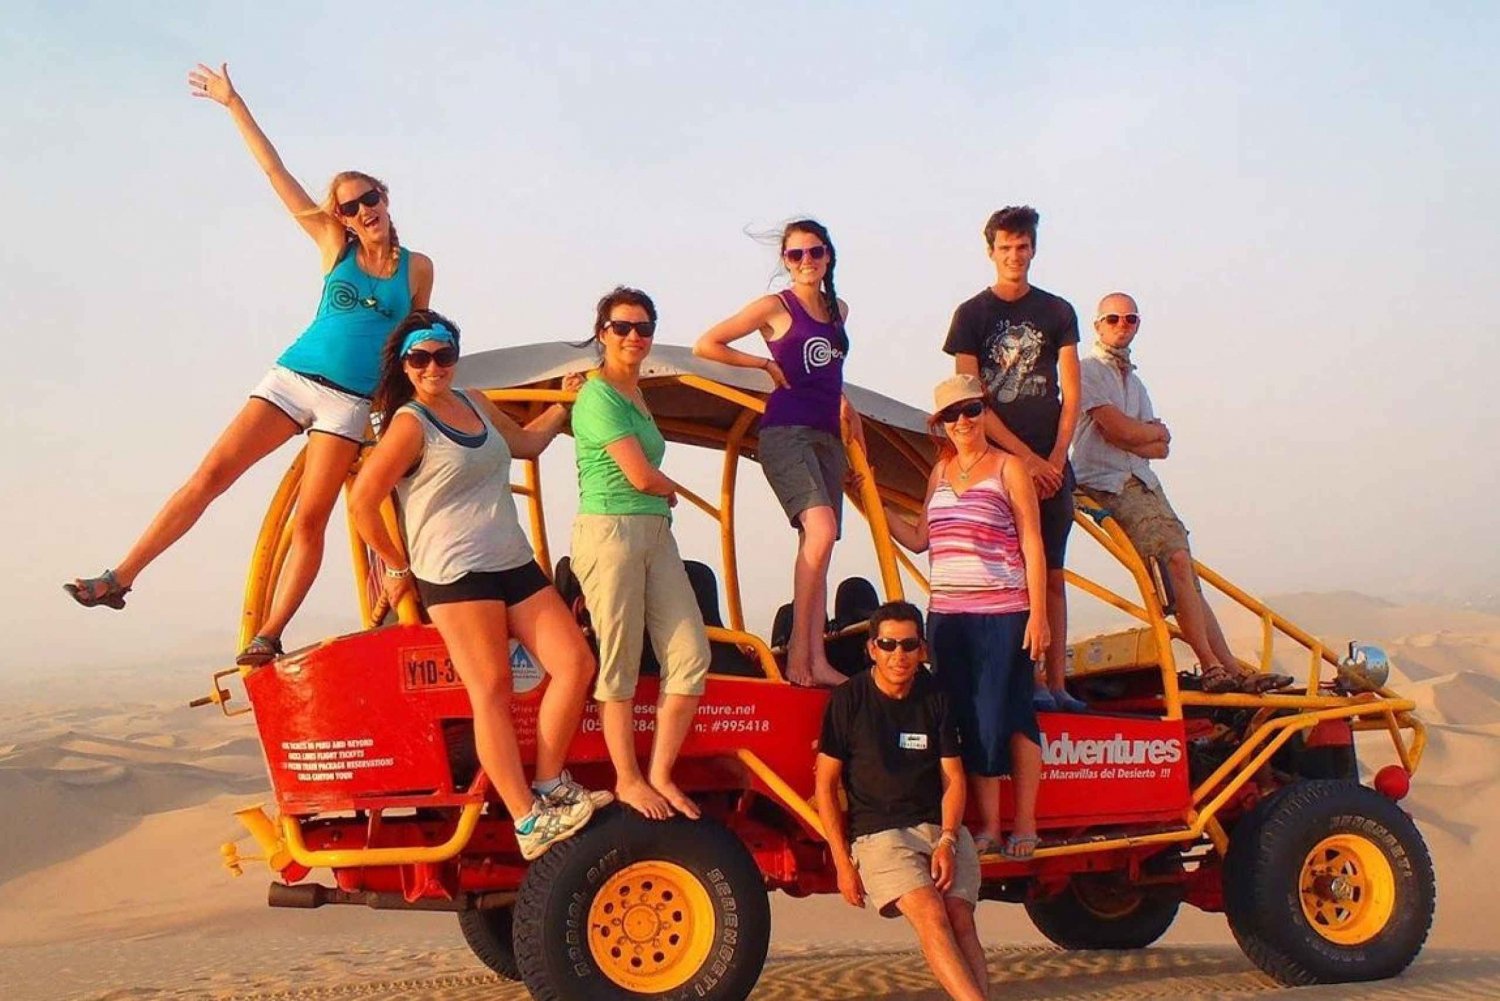 From Lima: city tour in Ica and visit the Huacachina oasis